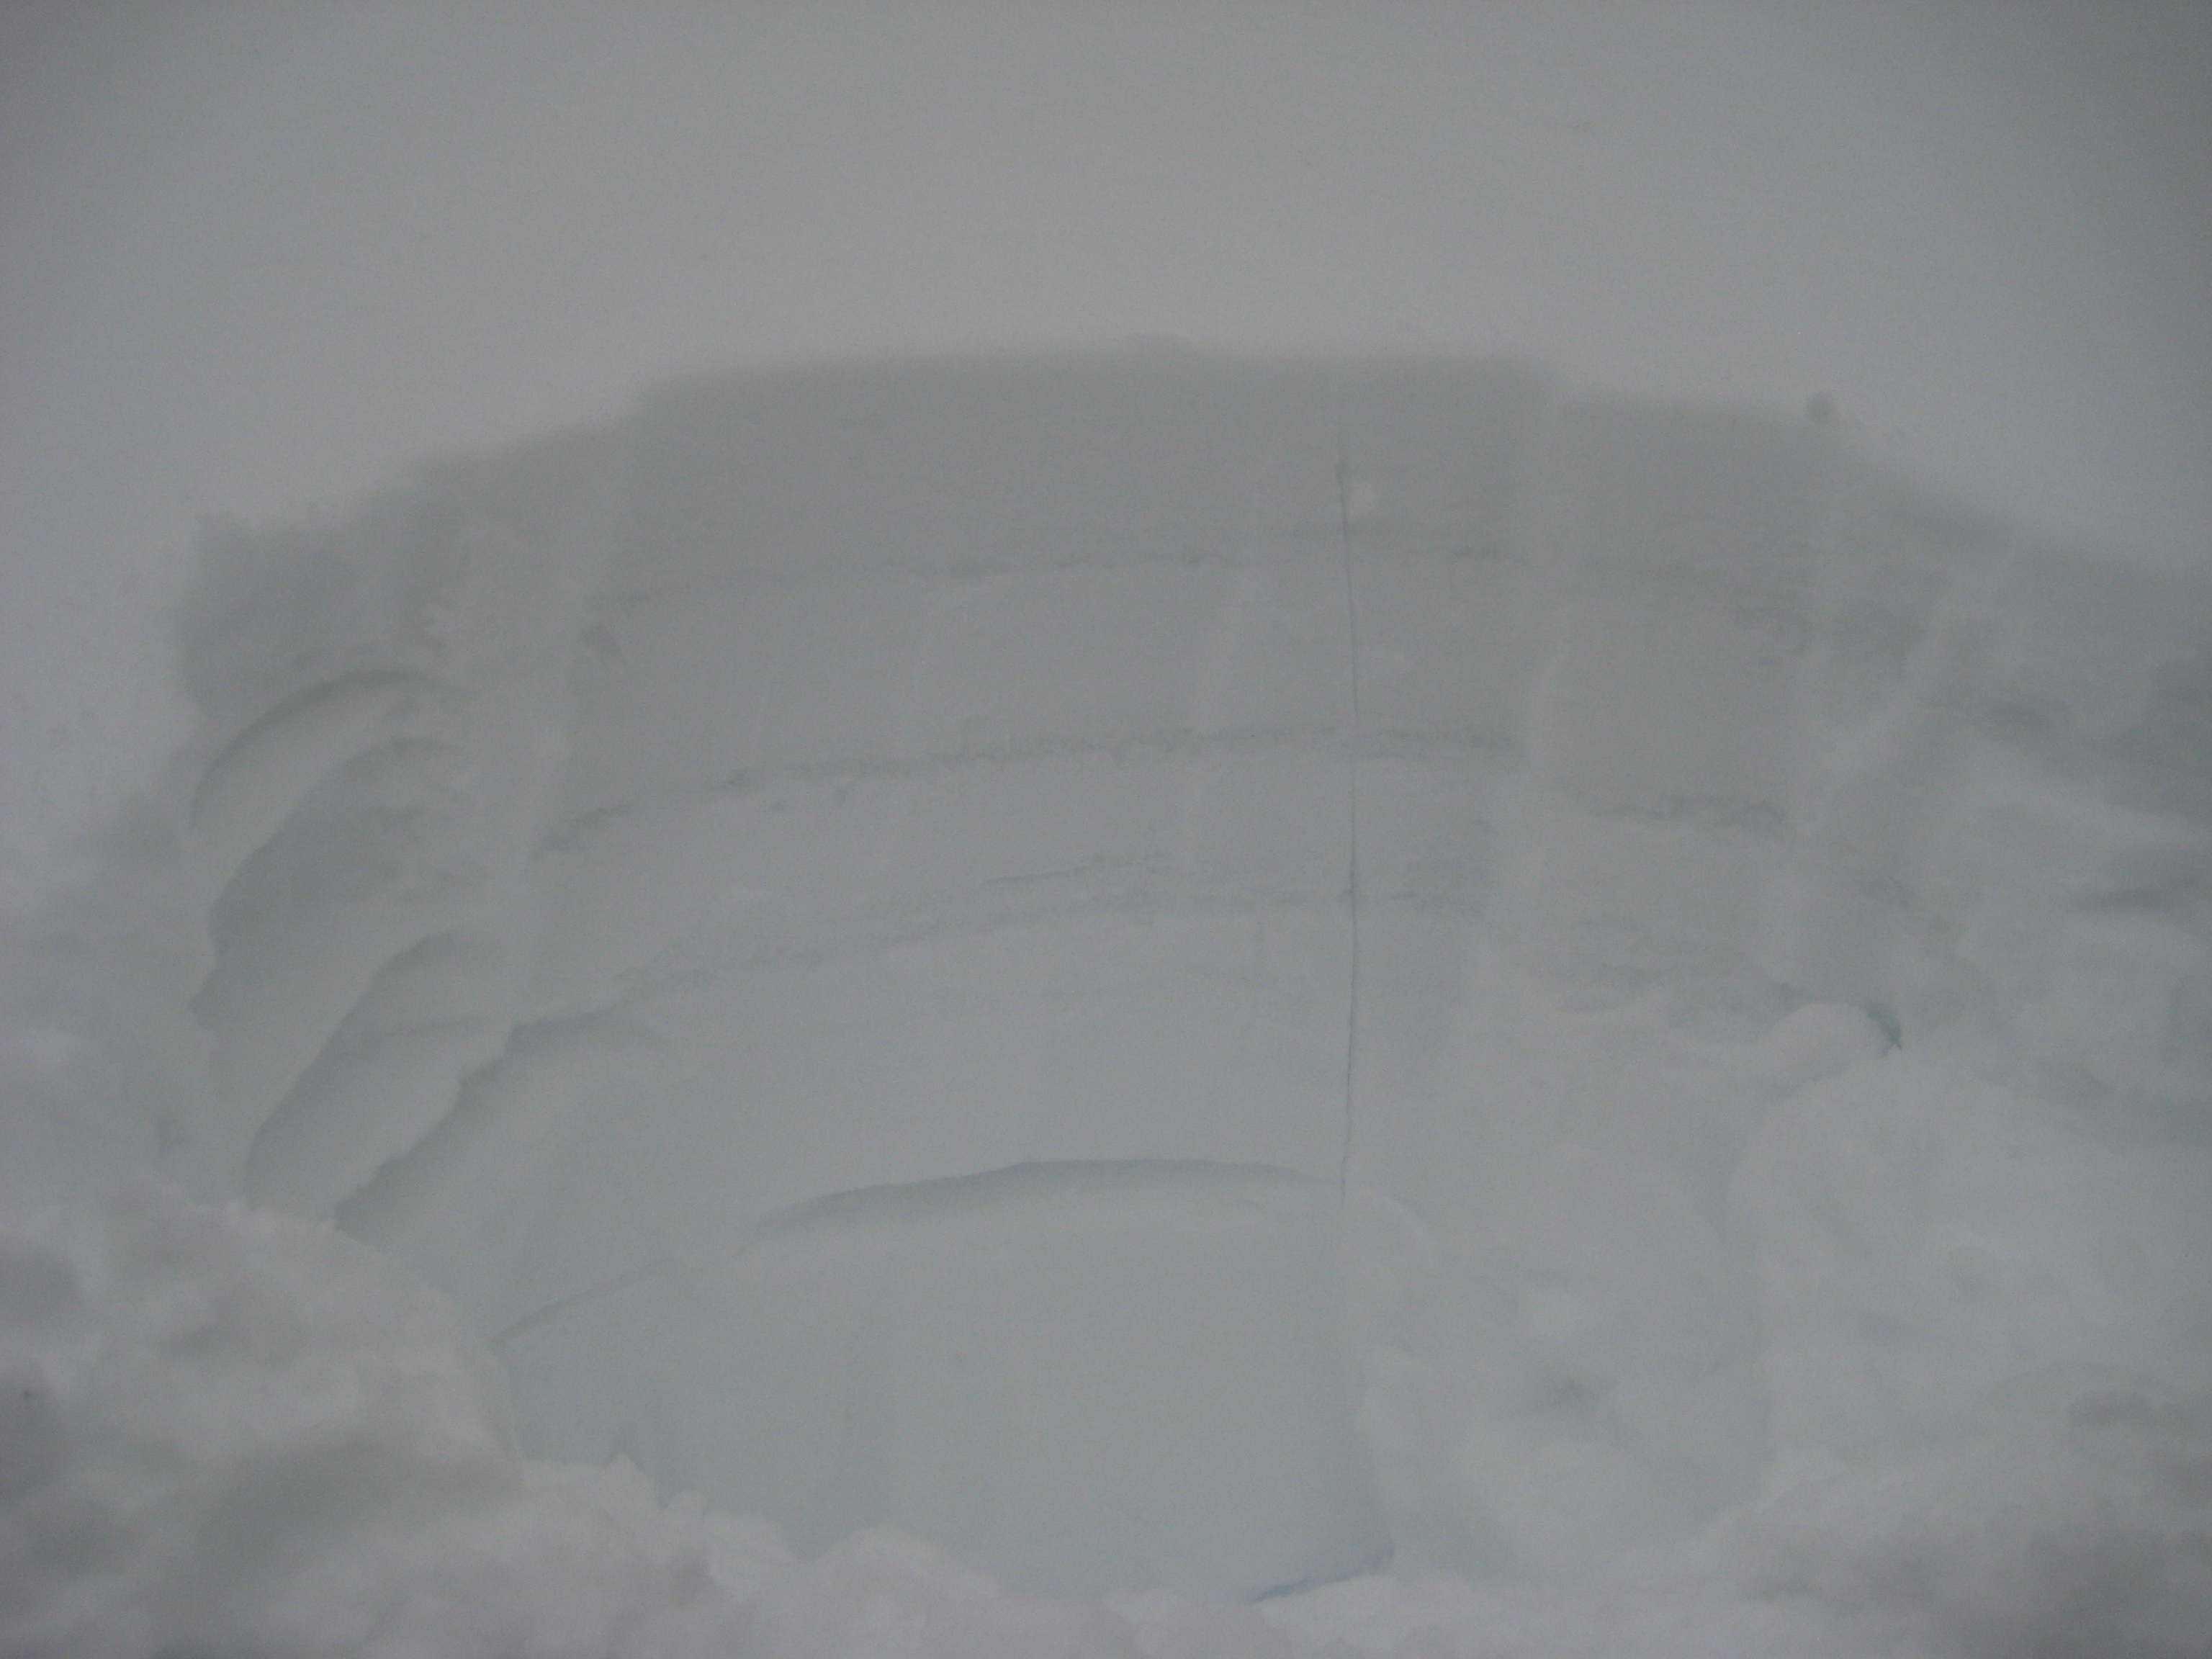 : <p>Snow Profile taken on avalanche flank shows 3 MF layers above buried surface hoar layer approximately 18-20″ deep.</p>
